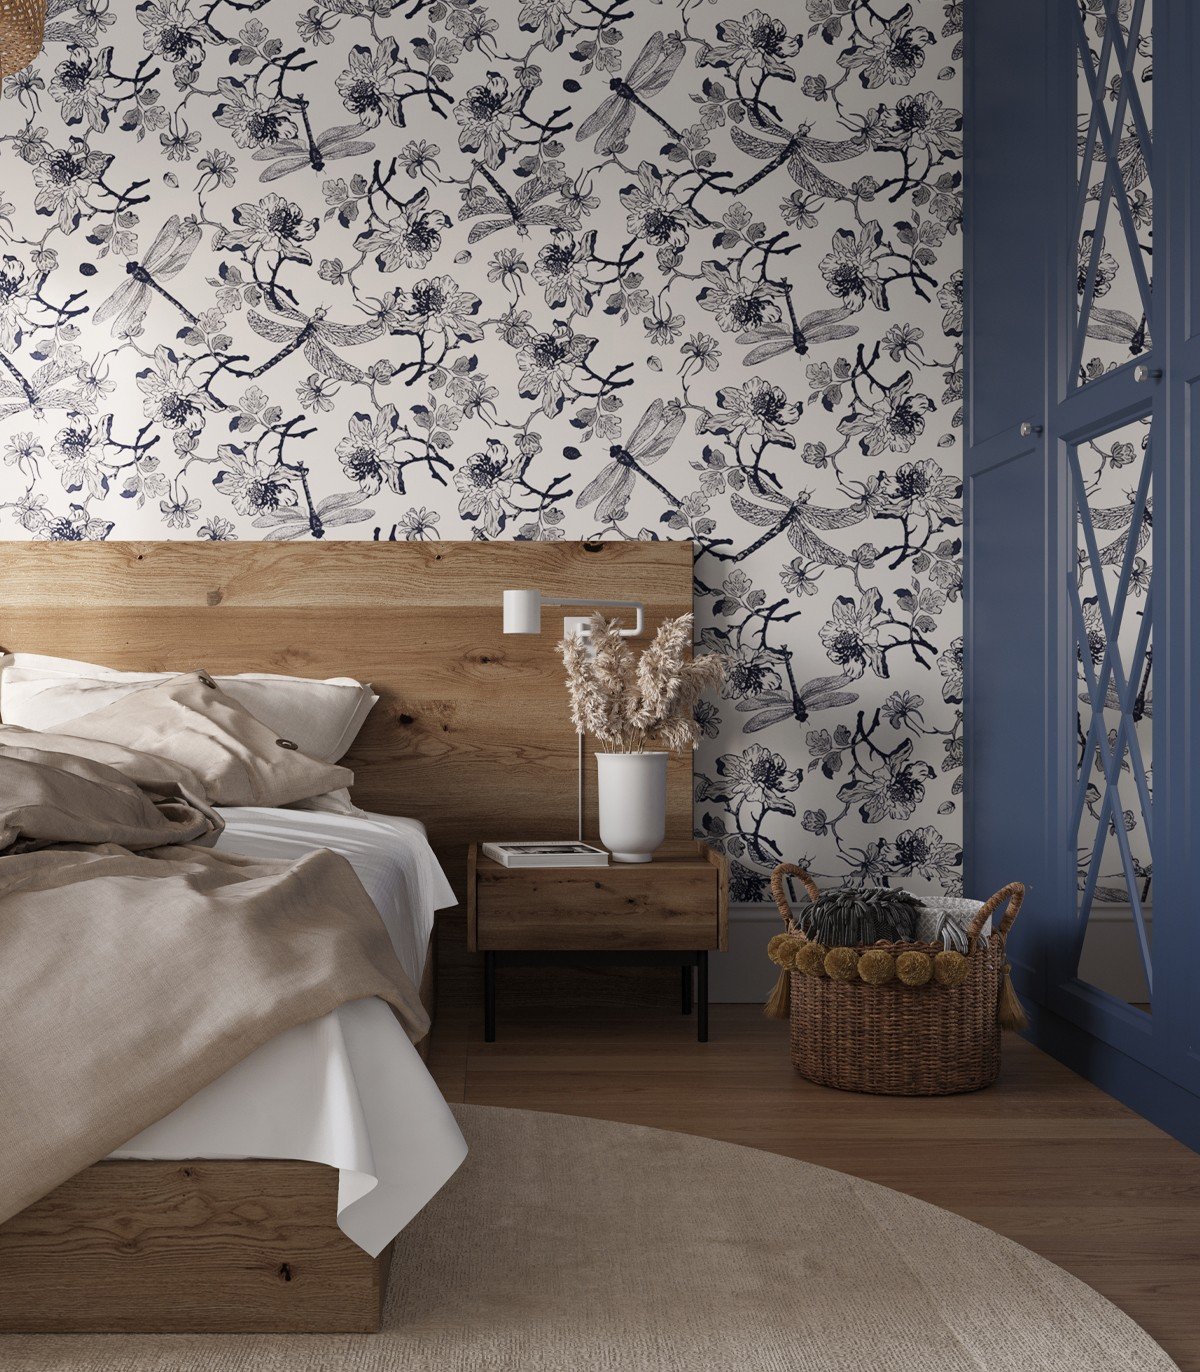 Amazing Wallpaper Design Ideas That Will Elevate Any Room